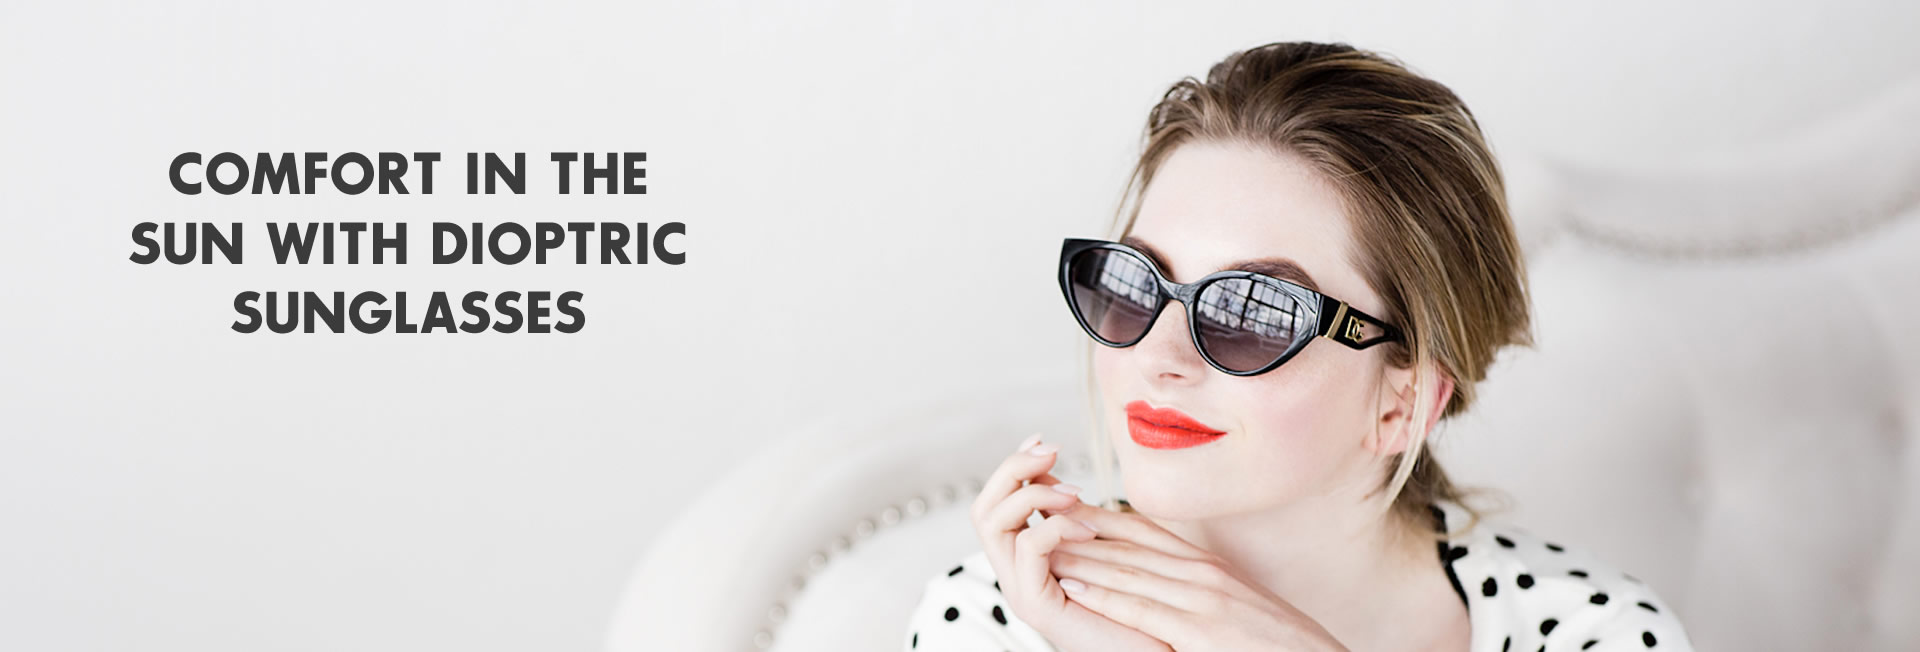 Comfort in the sun with dioptric sunglasse